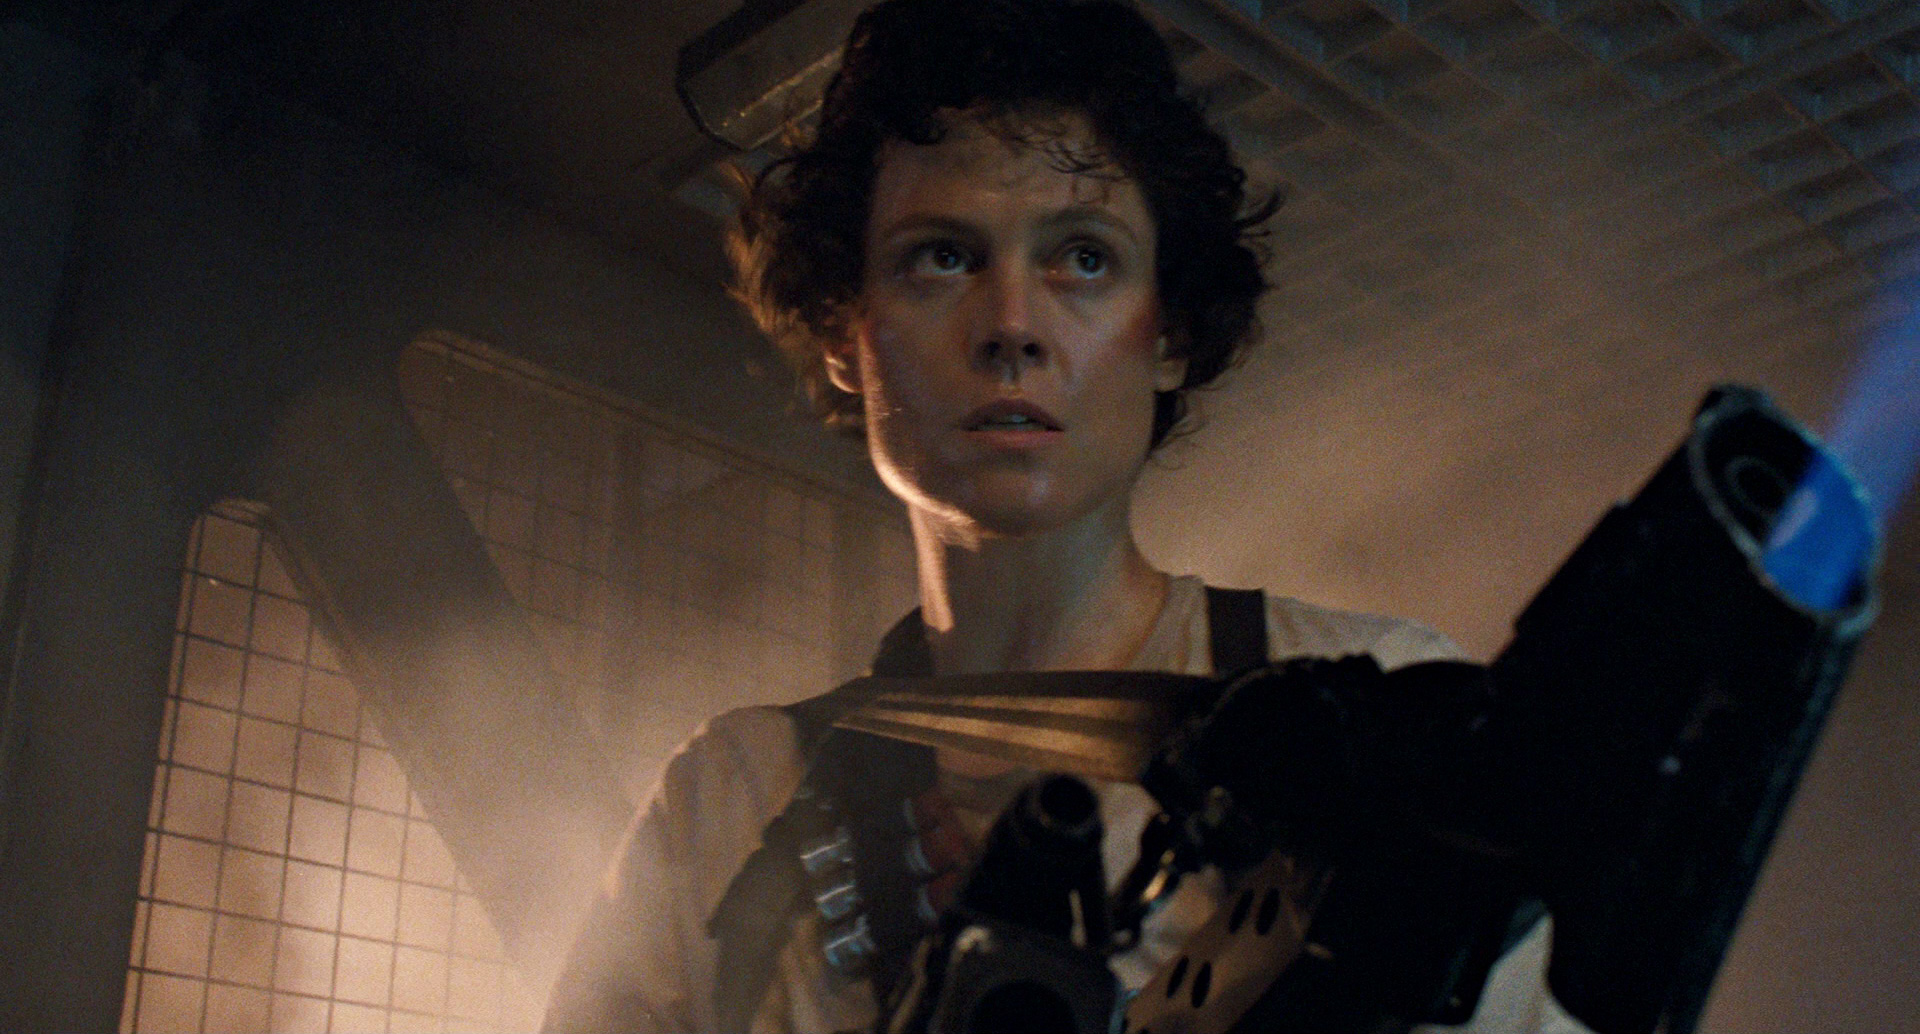 Sigourney Weaver suggests she is done playing Ripley in the Alien franchise for good.